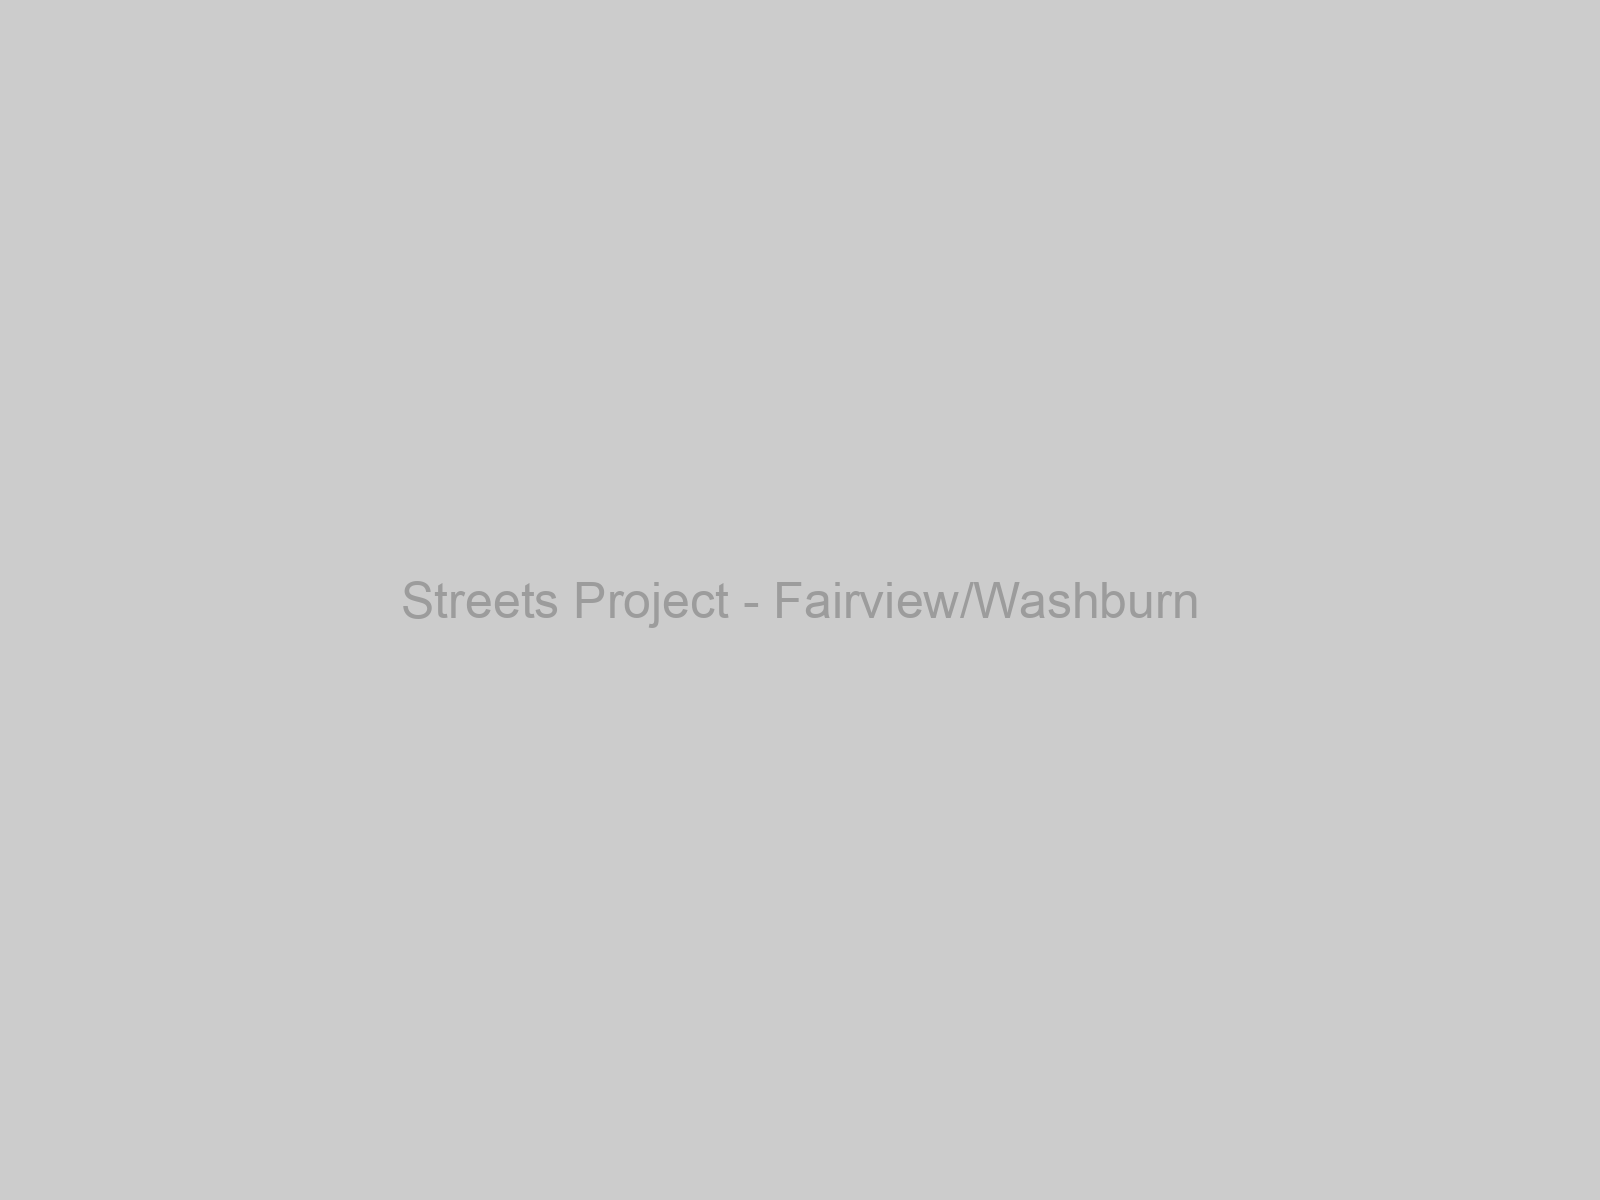 Streets Project - Fairview/Washburn